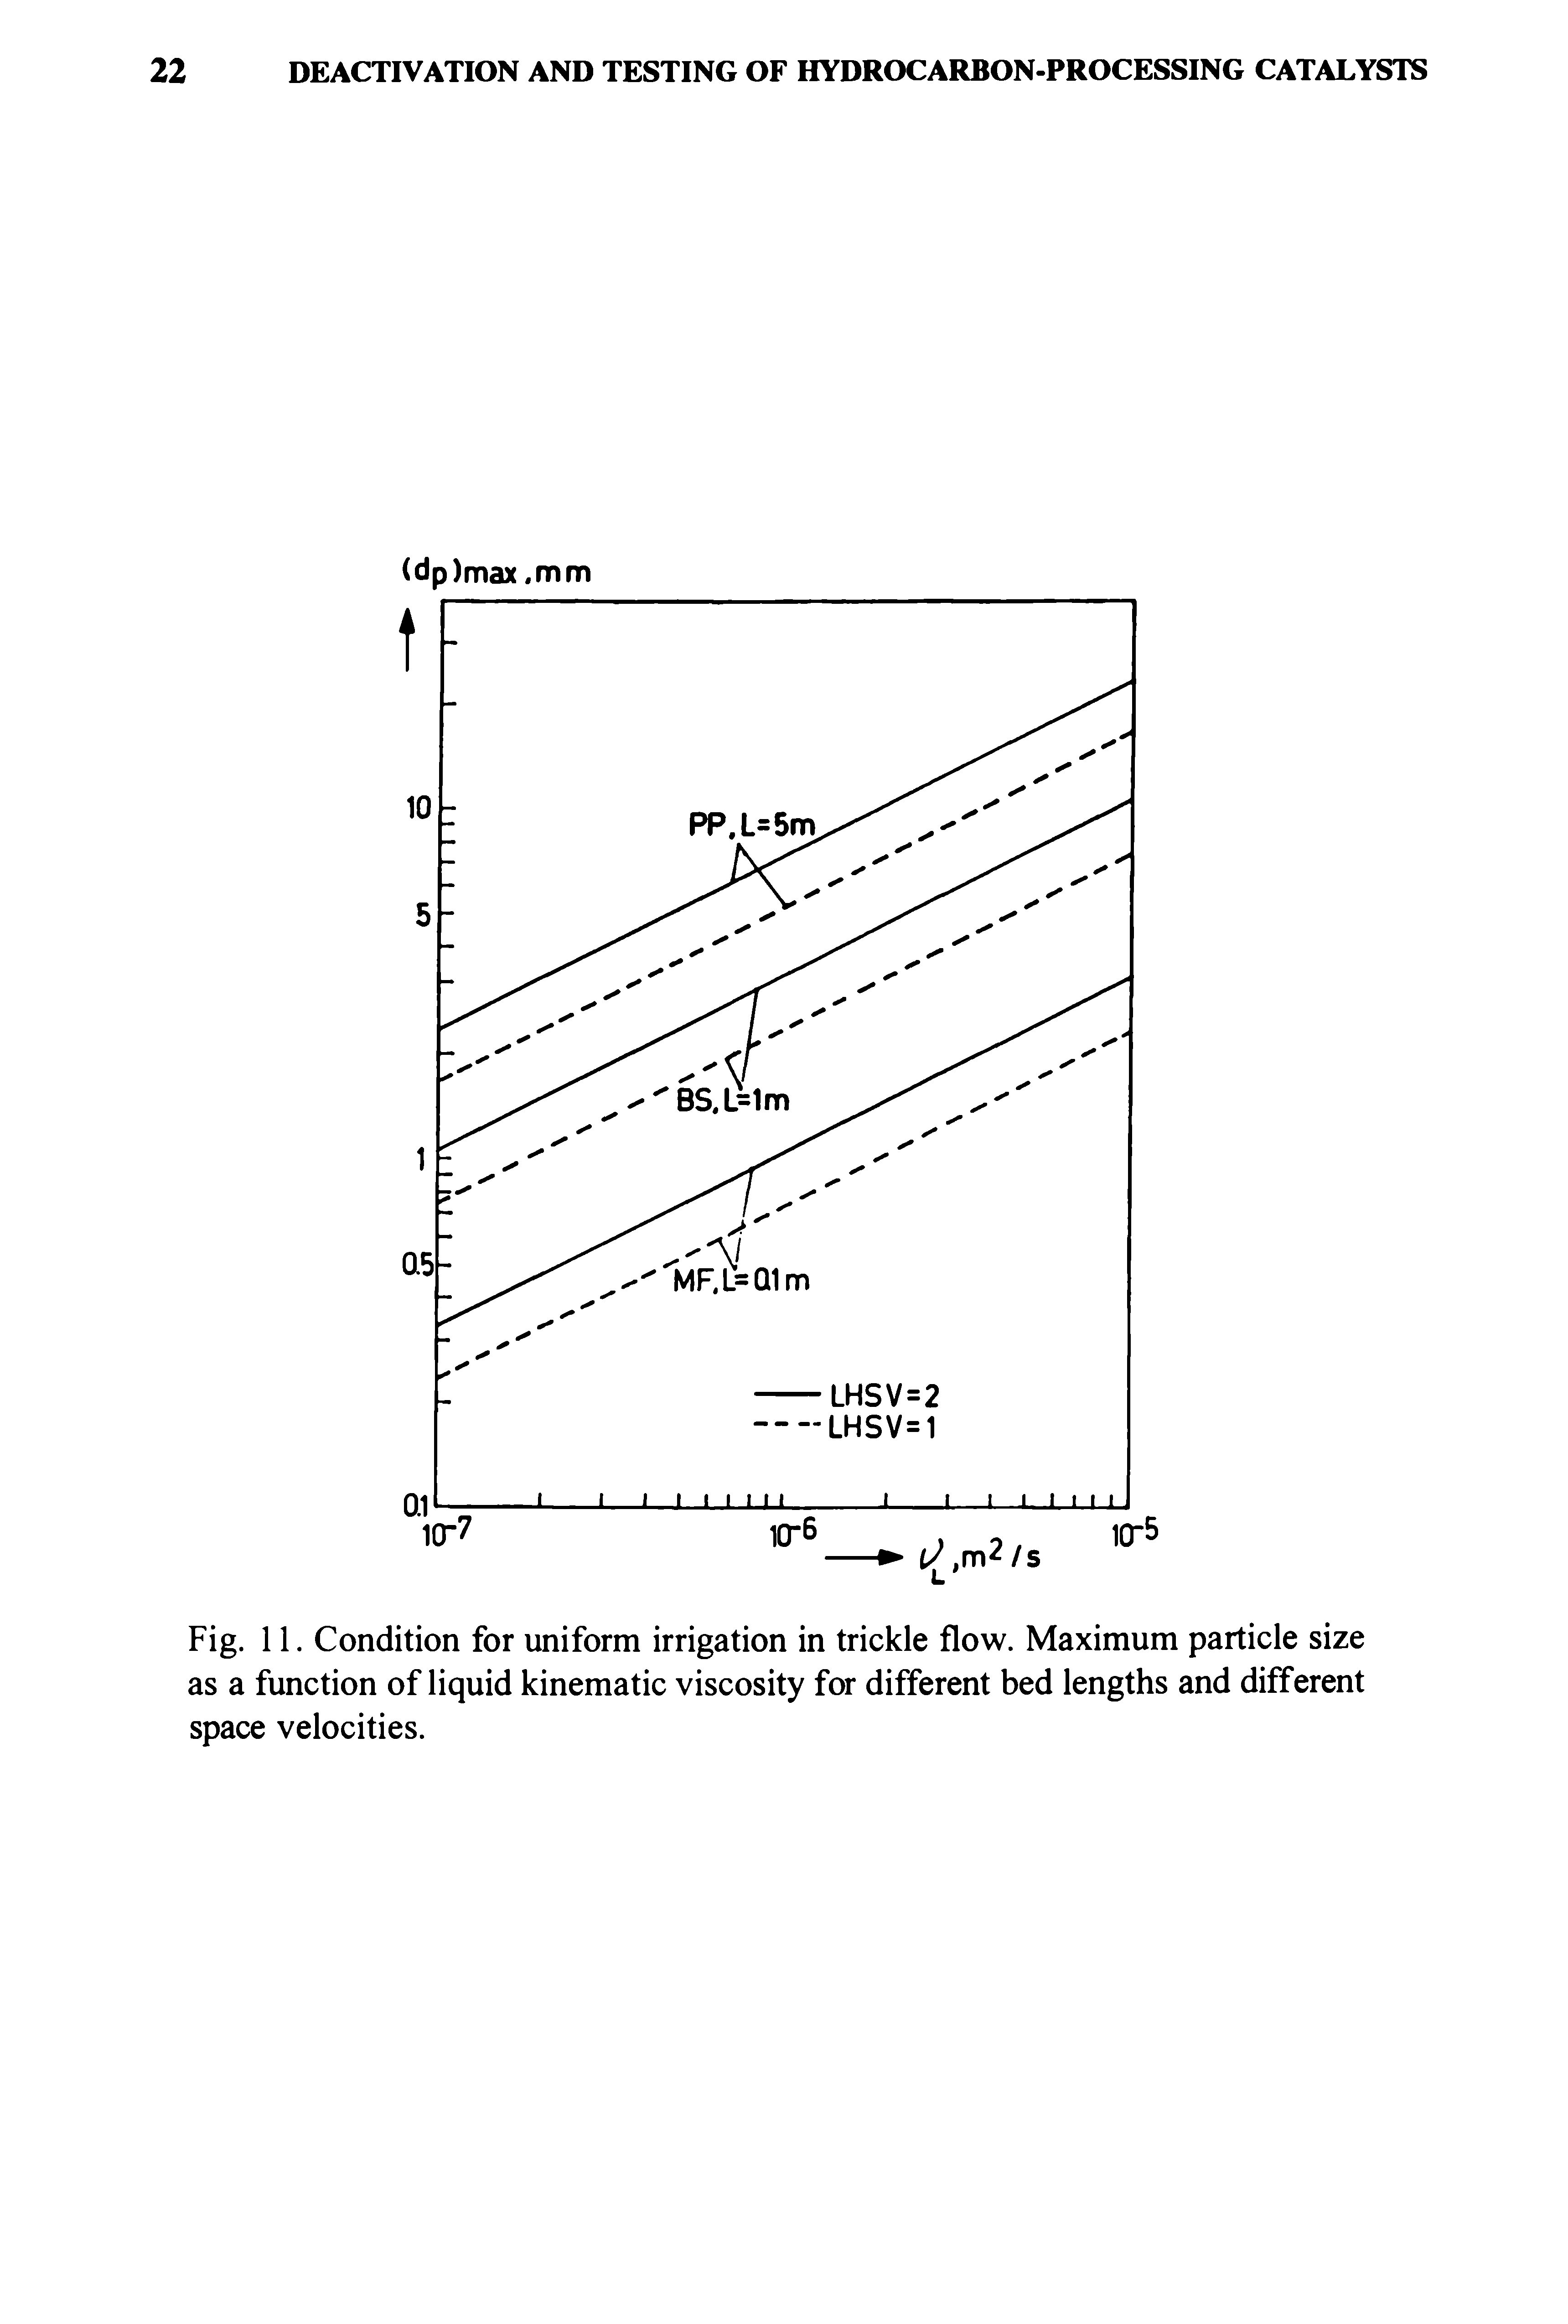 Fig. 11. Condition for uniform irrigation in trickle flow. Maximum particle size as a function of liquid kinematic viscosity for different bed lengths and different space velocities.